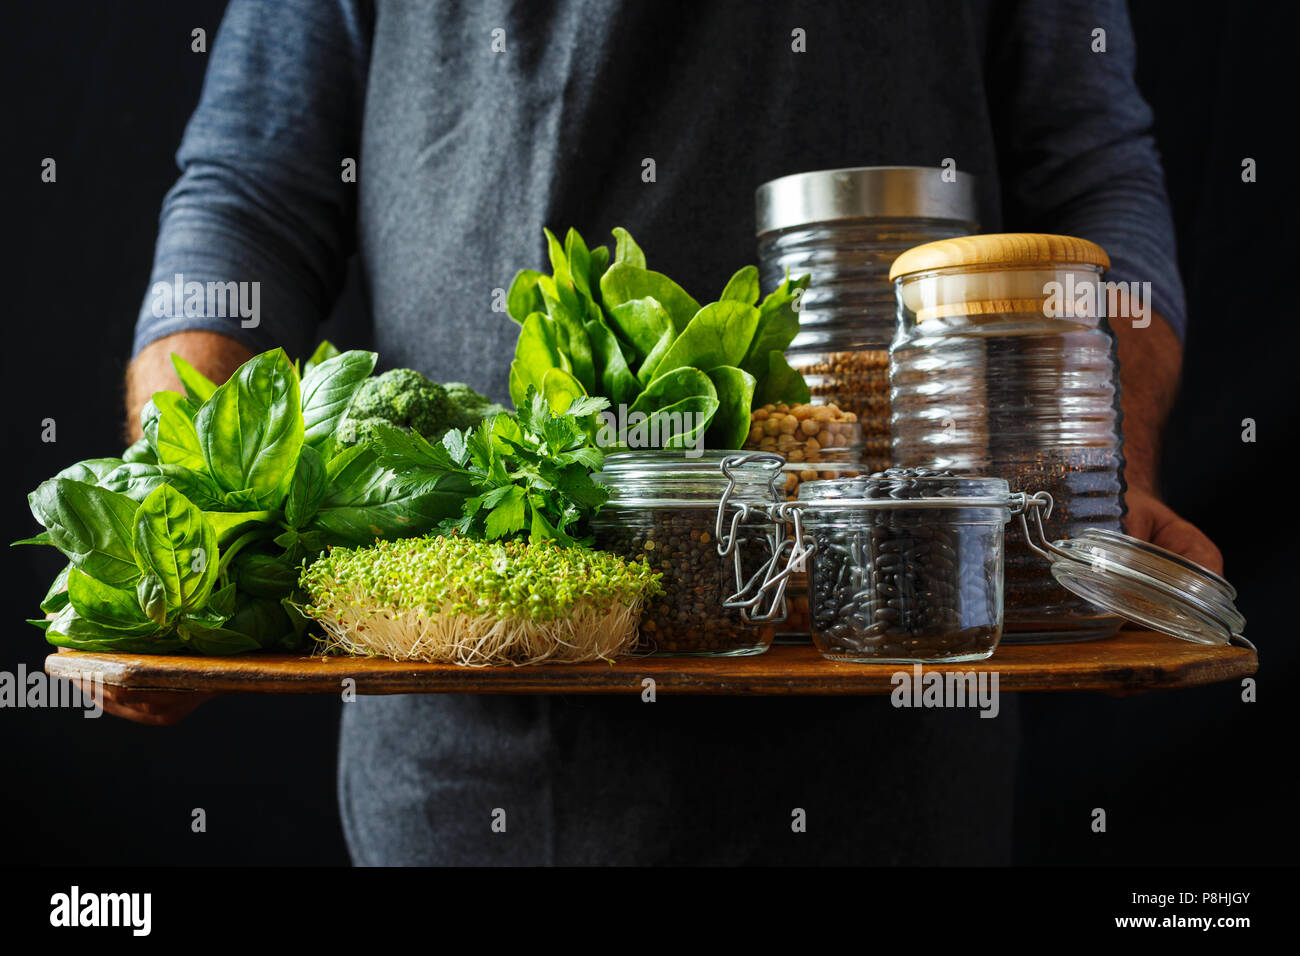 Man holds set healthy food, protein source for vegetarians: spinach, basil, parsley, broccoli, quinoa, black beans, green lentils, chickpeas and buckw Stock Photo